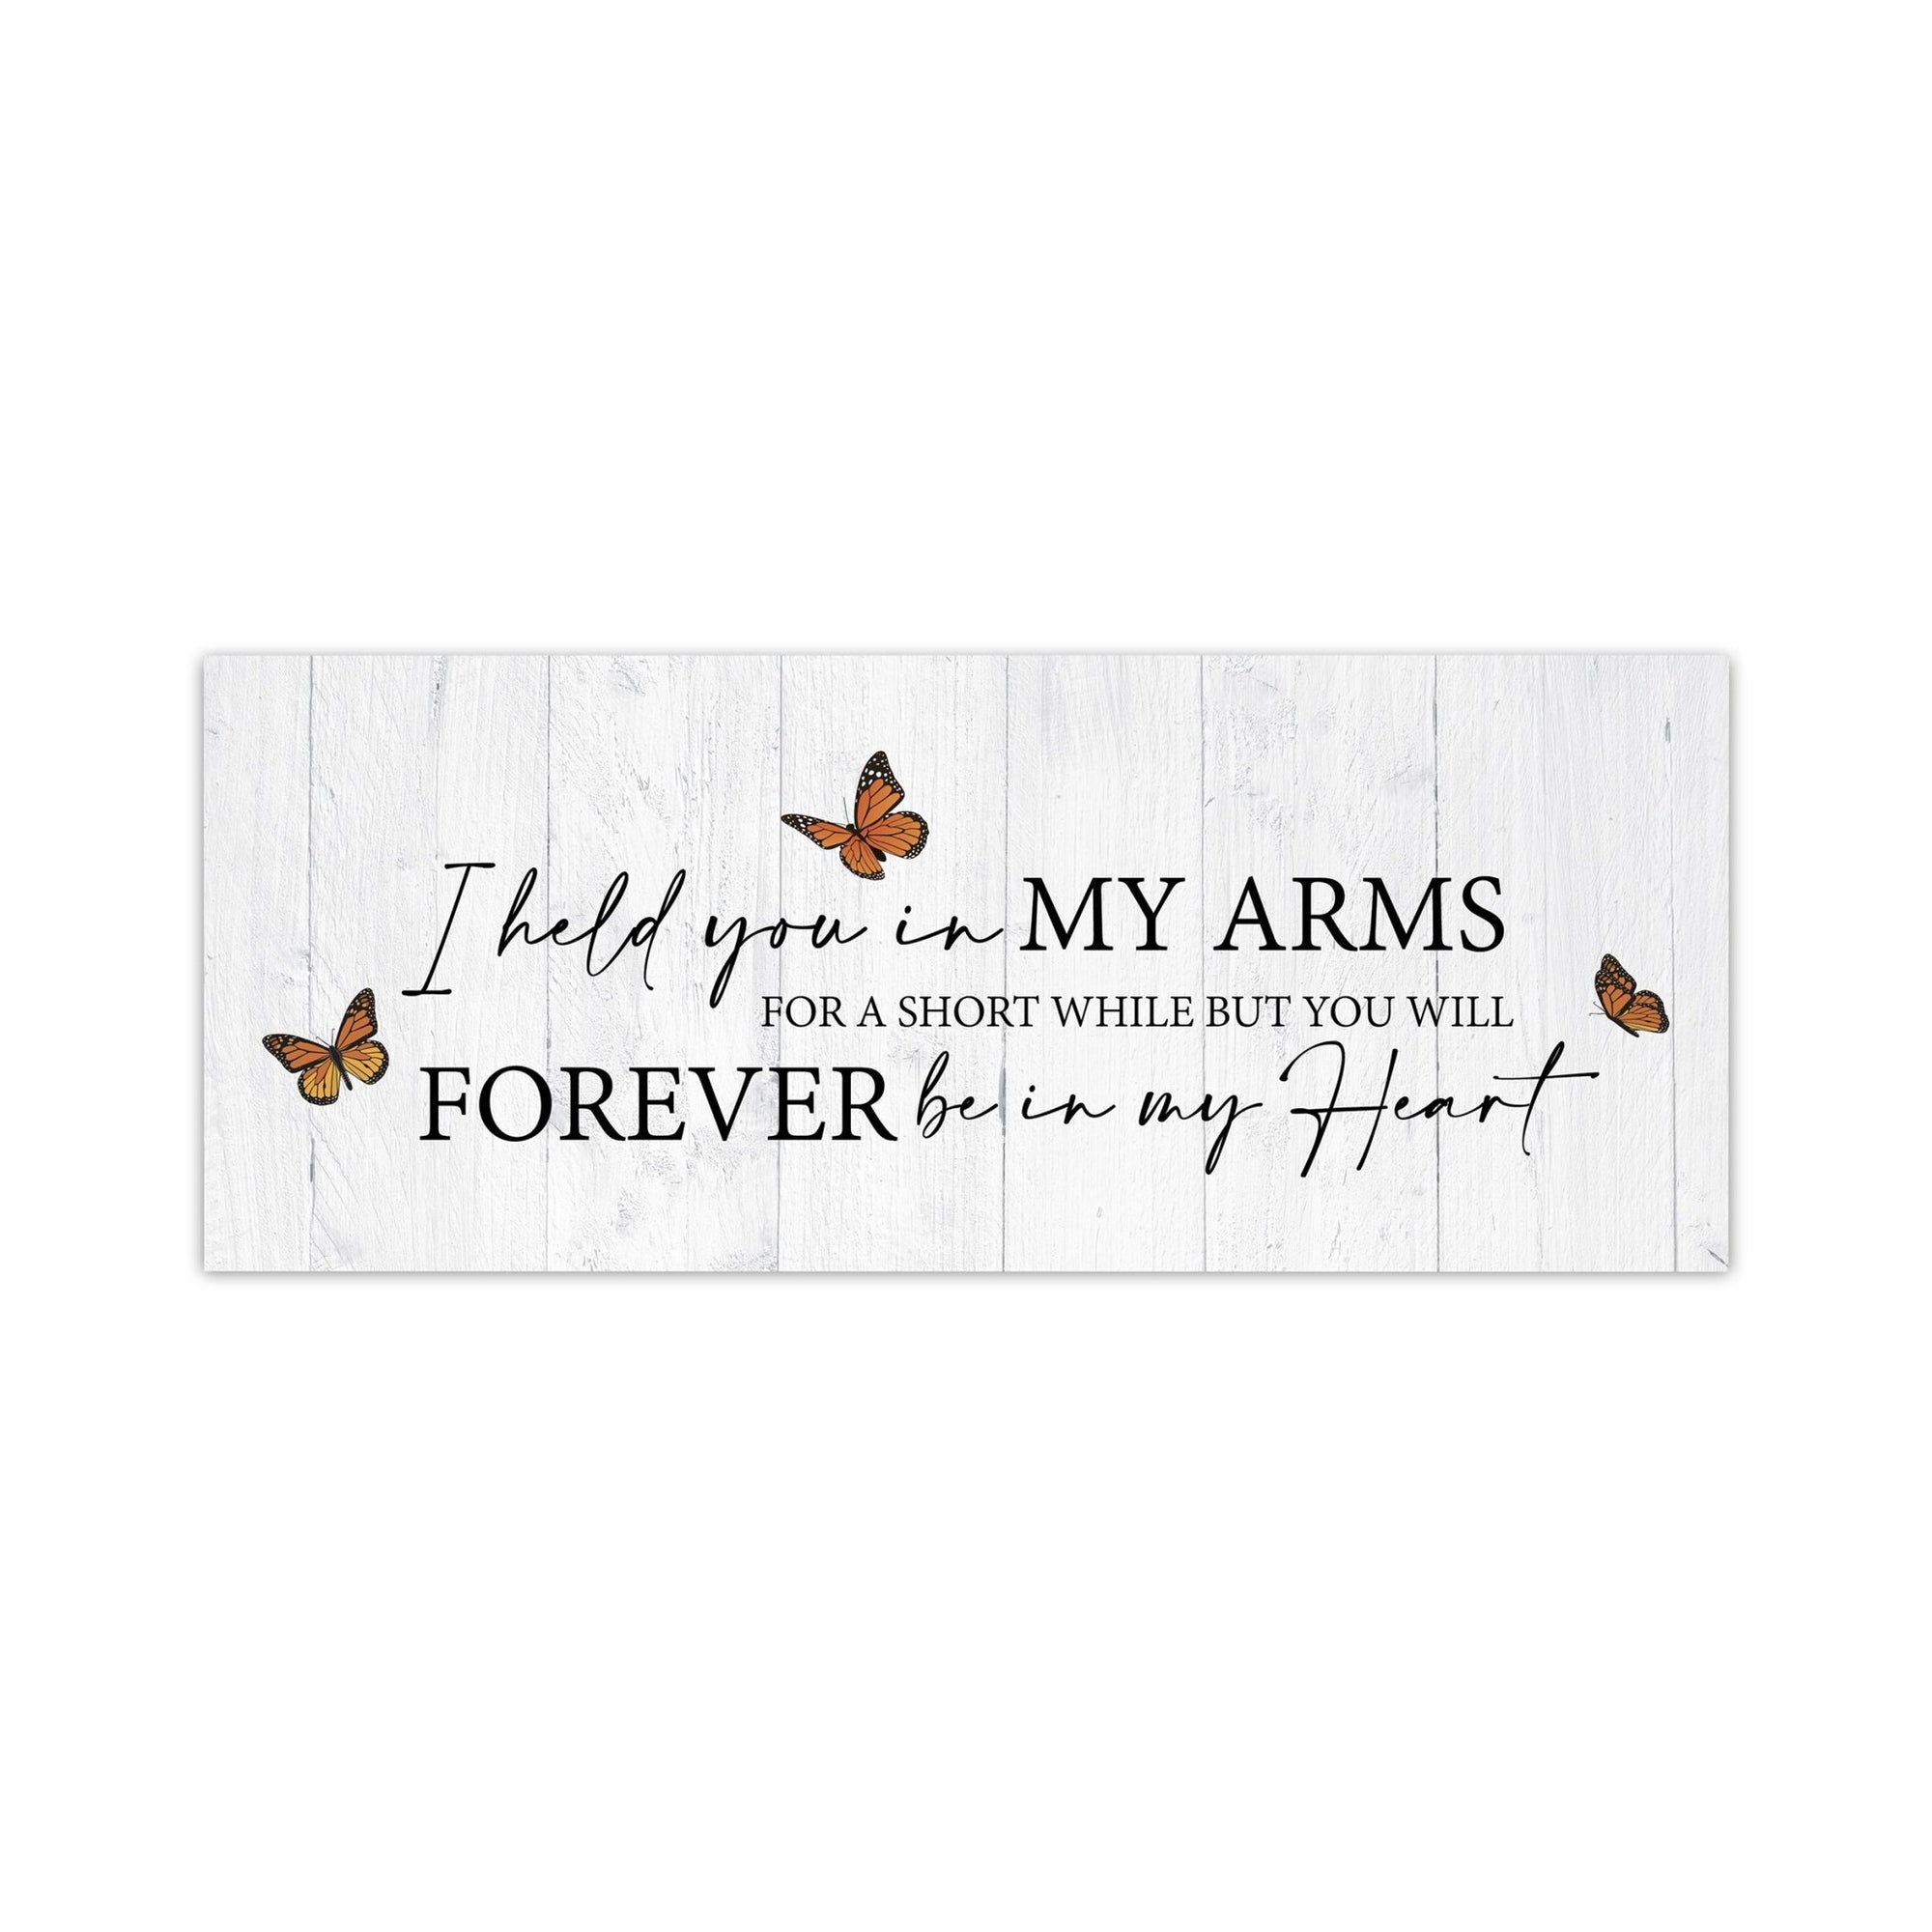 Modern Inspirational Wooden Pet Memorial Wall Art Hanging Plaque 4x10in - I Held You In My Arms - for Family and Home Decorations - LifeSong Milestones